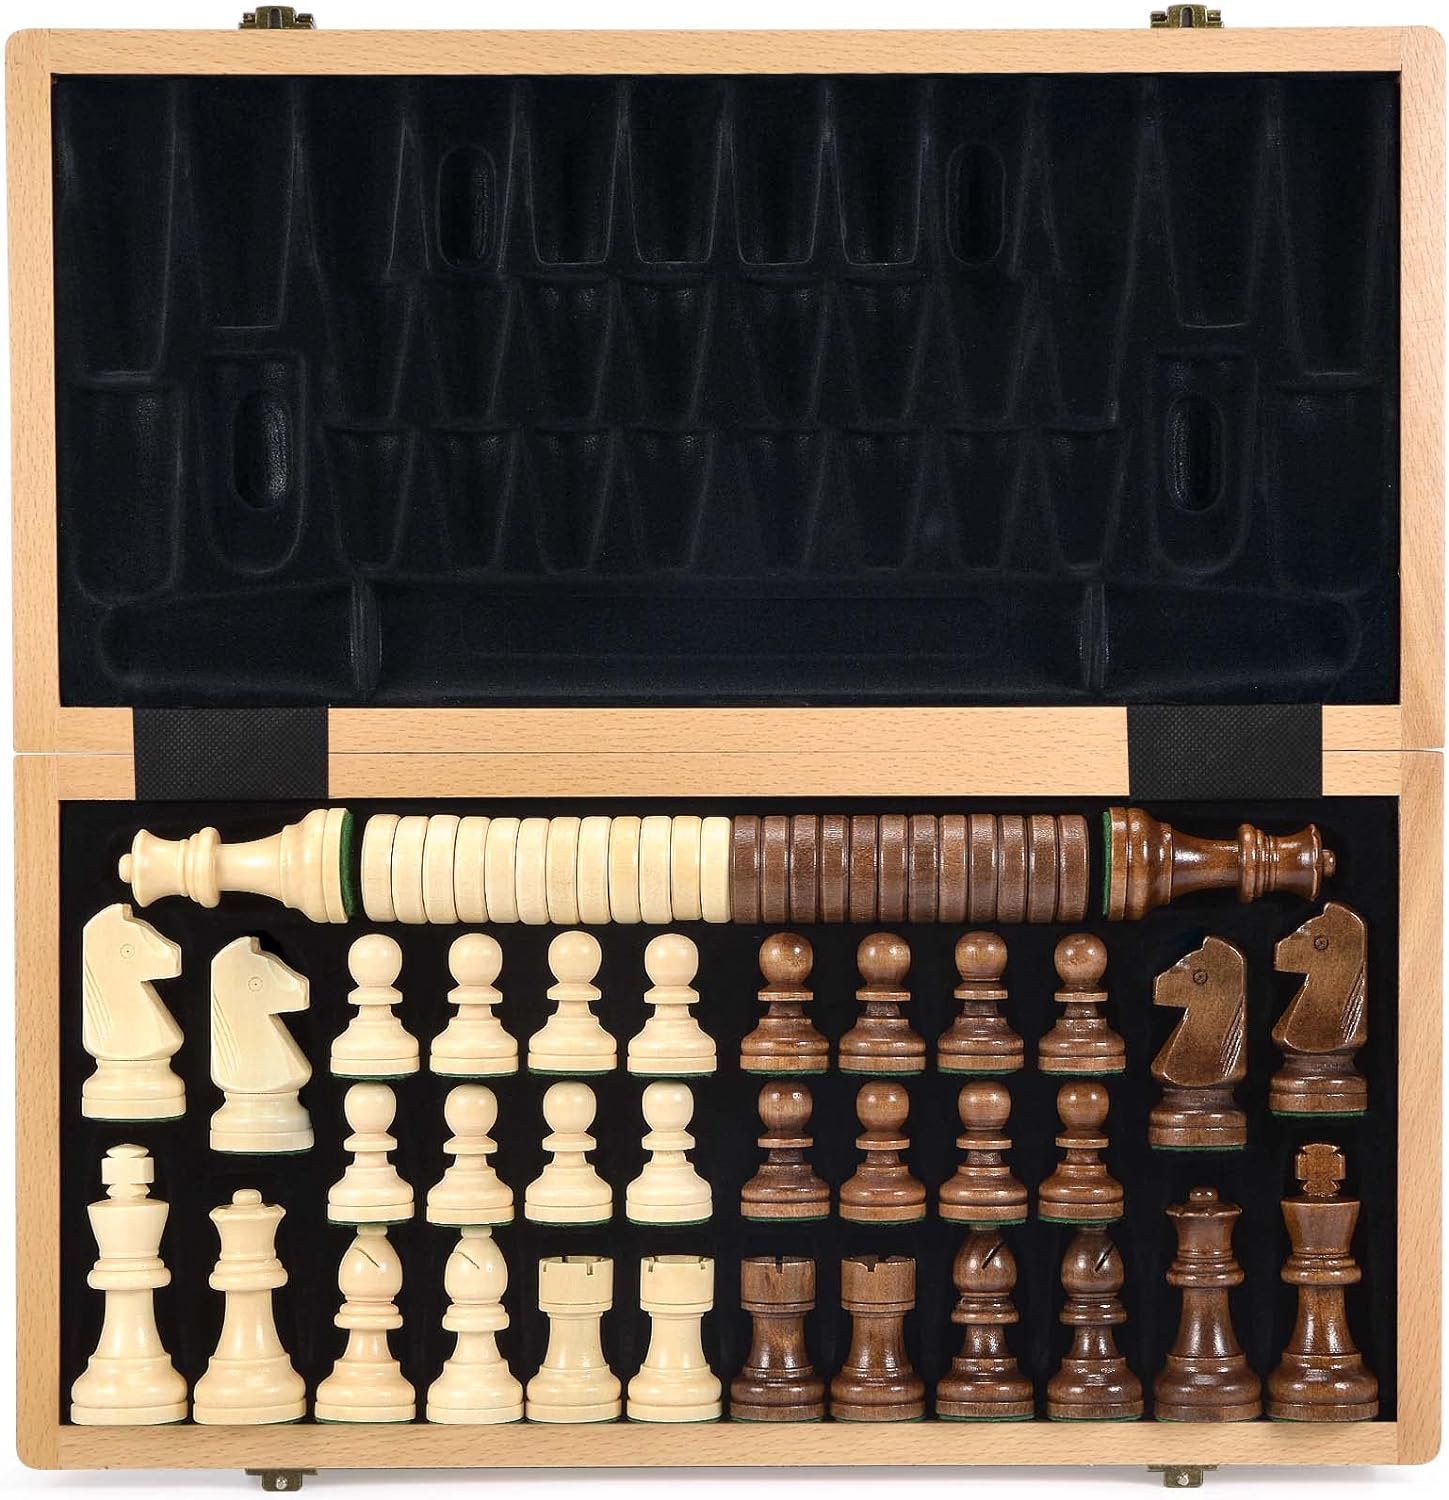 15 Inches Wooden Chess & Checkers Set with Upgraded Weighted Chess Pieces - 2 Extra Queen -24 Cherkers Pieces -Instruction -Chessmen Storage Slots, Classic 2 in 1 Board Games